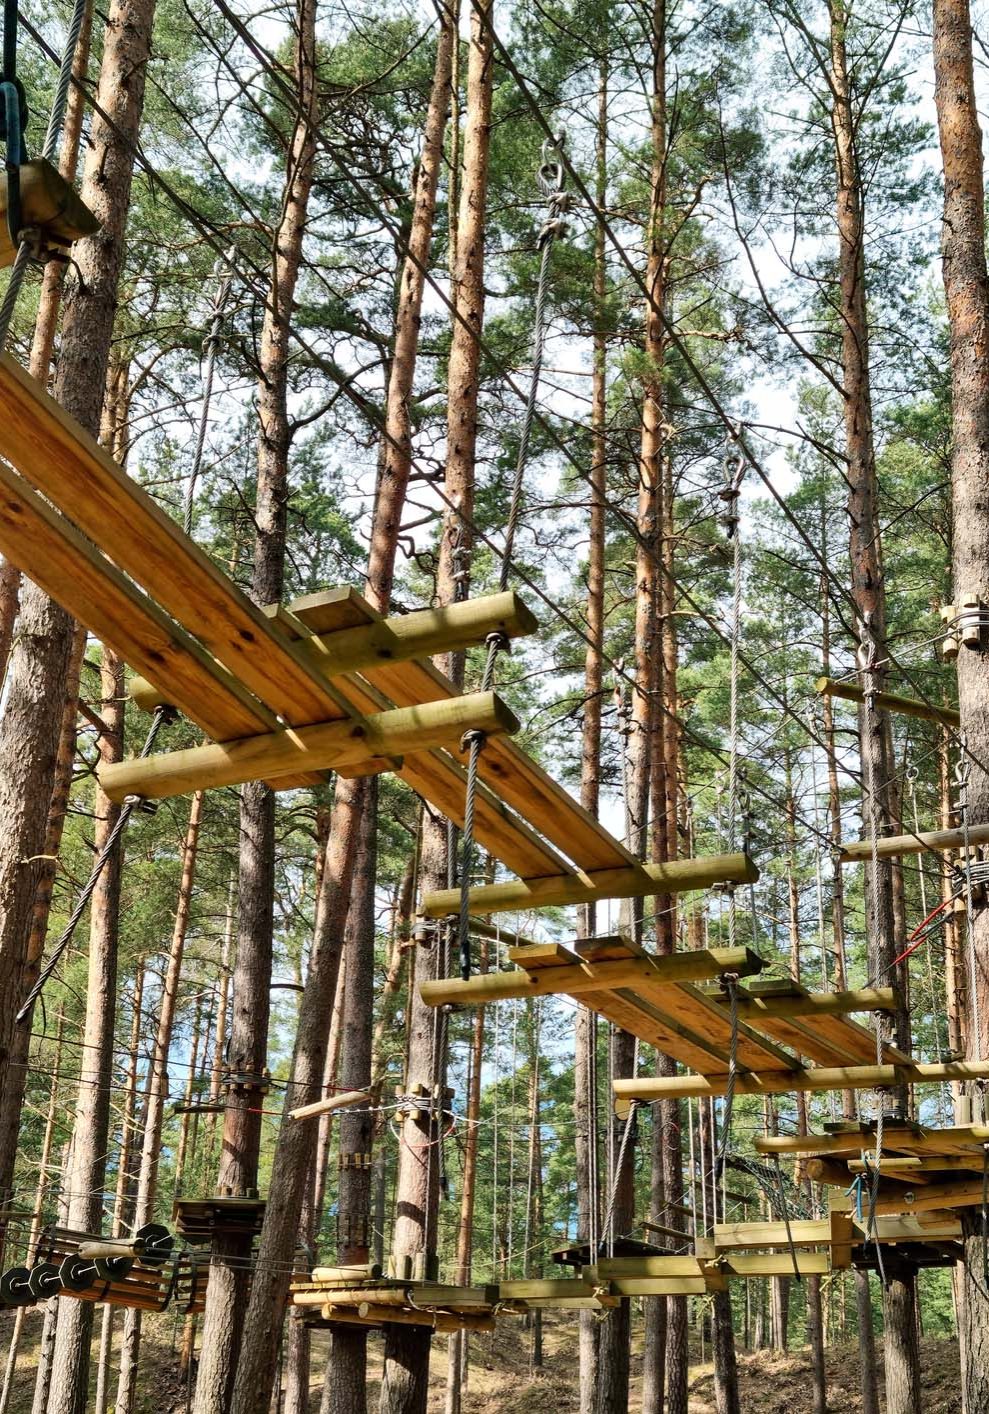 Rope obstacle track high in the trees in outdoor adventure park